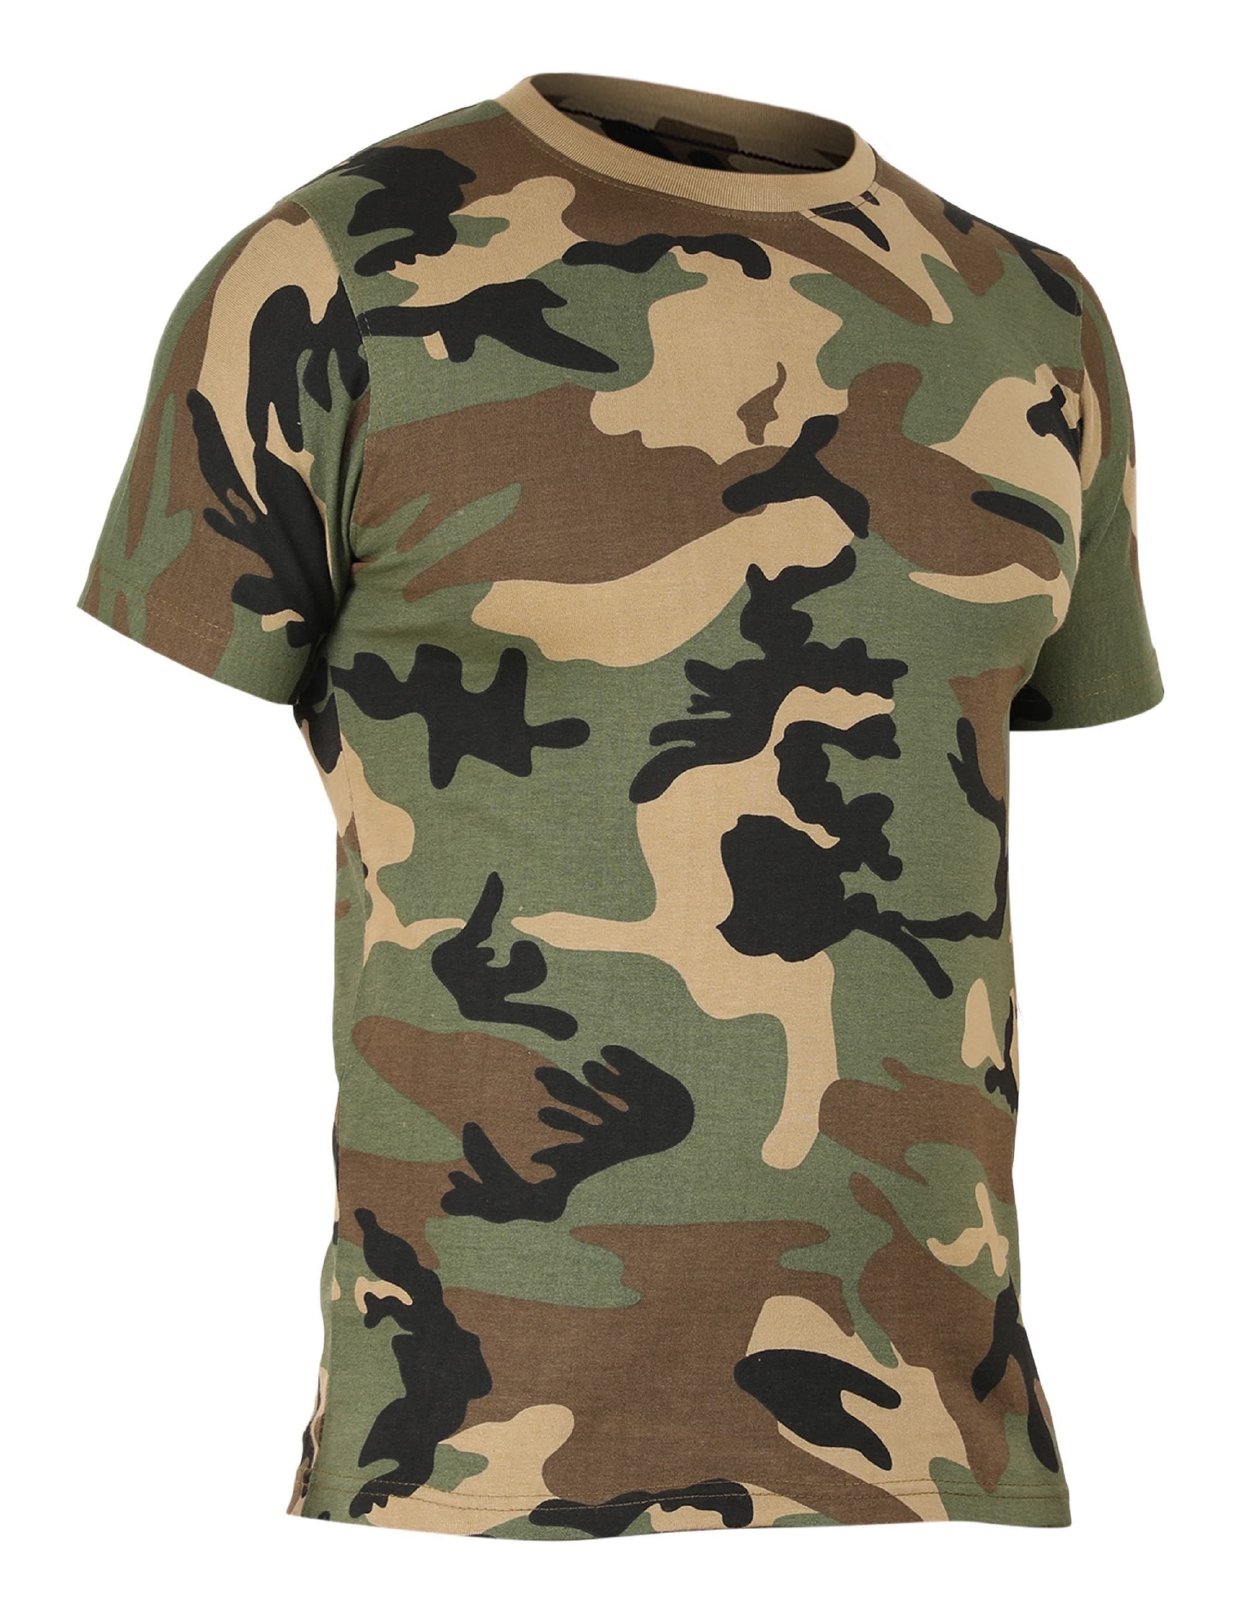 Camouflage Military Army T-Shirt